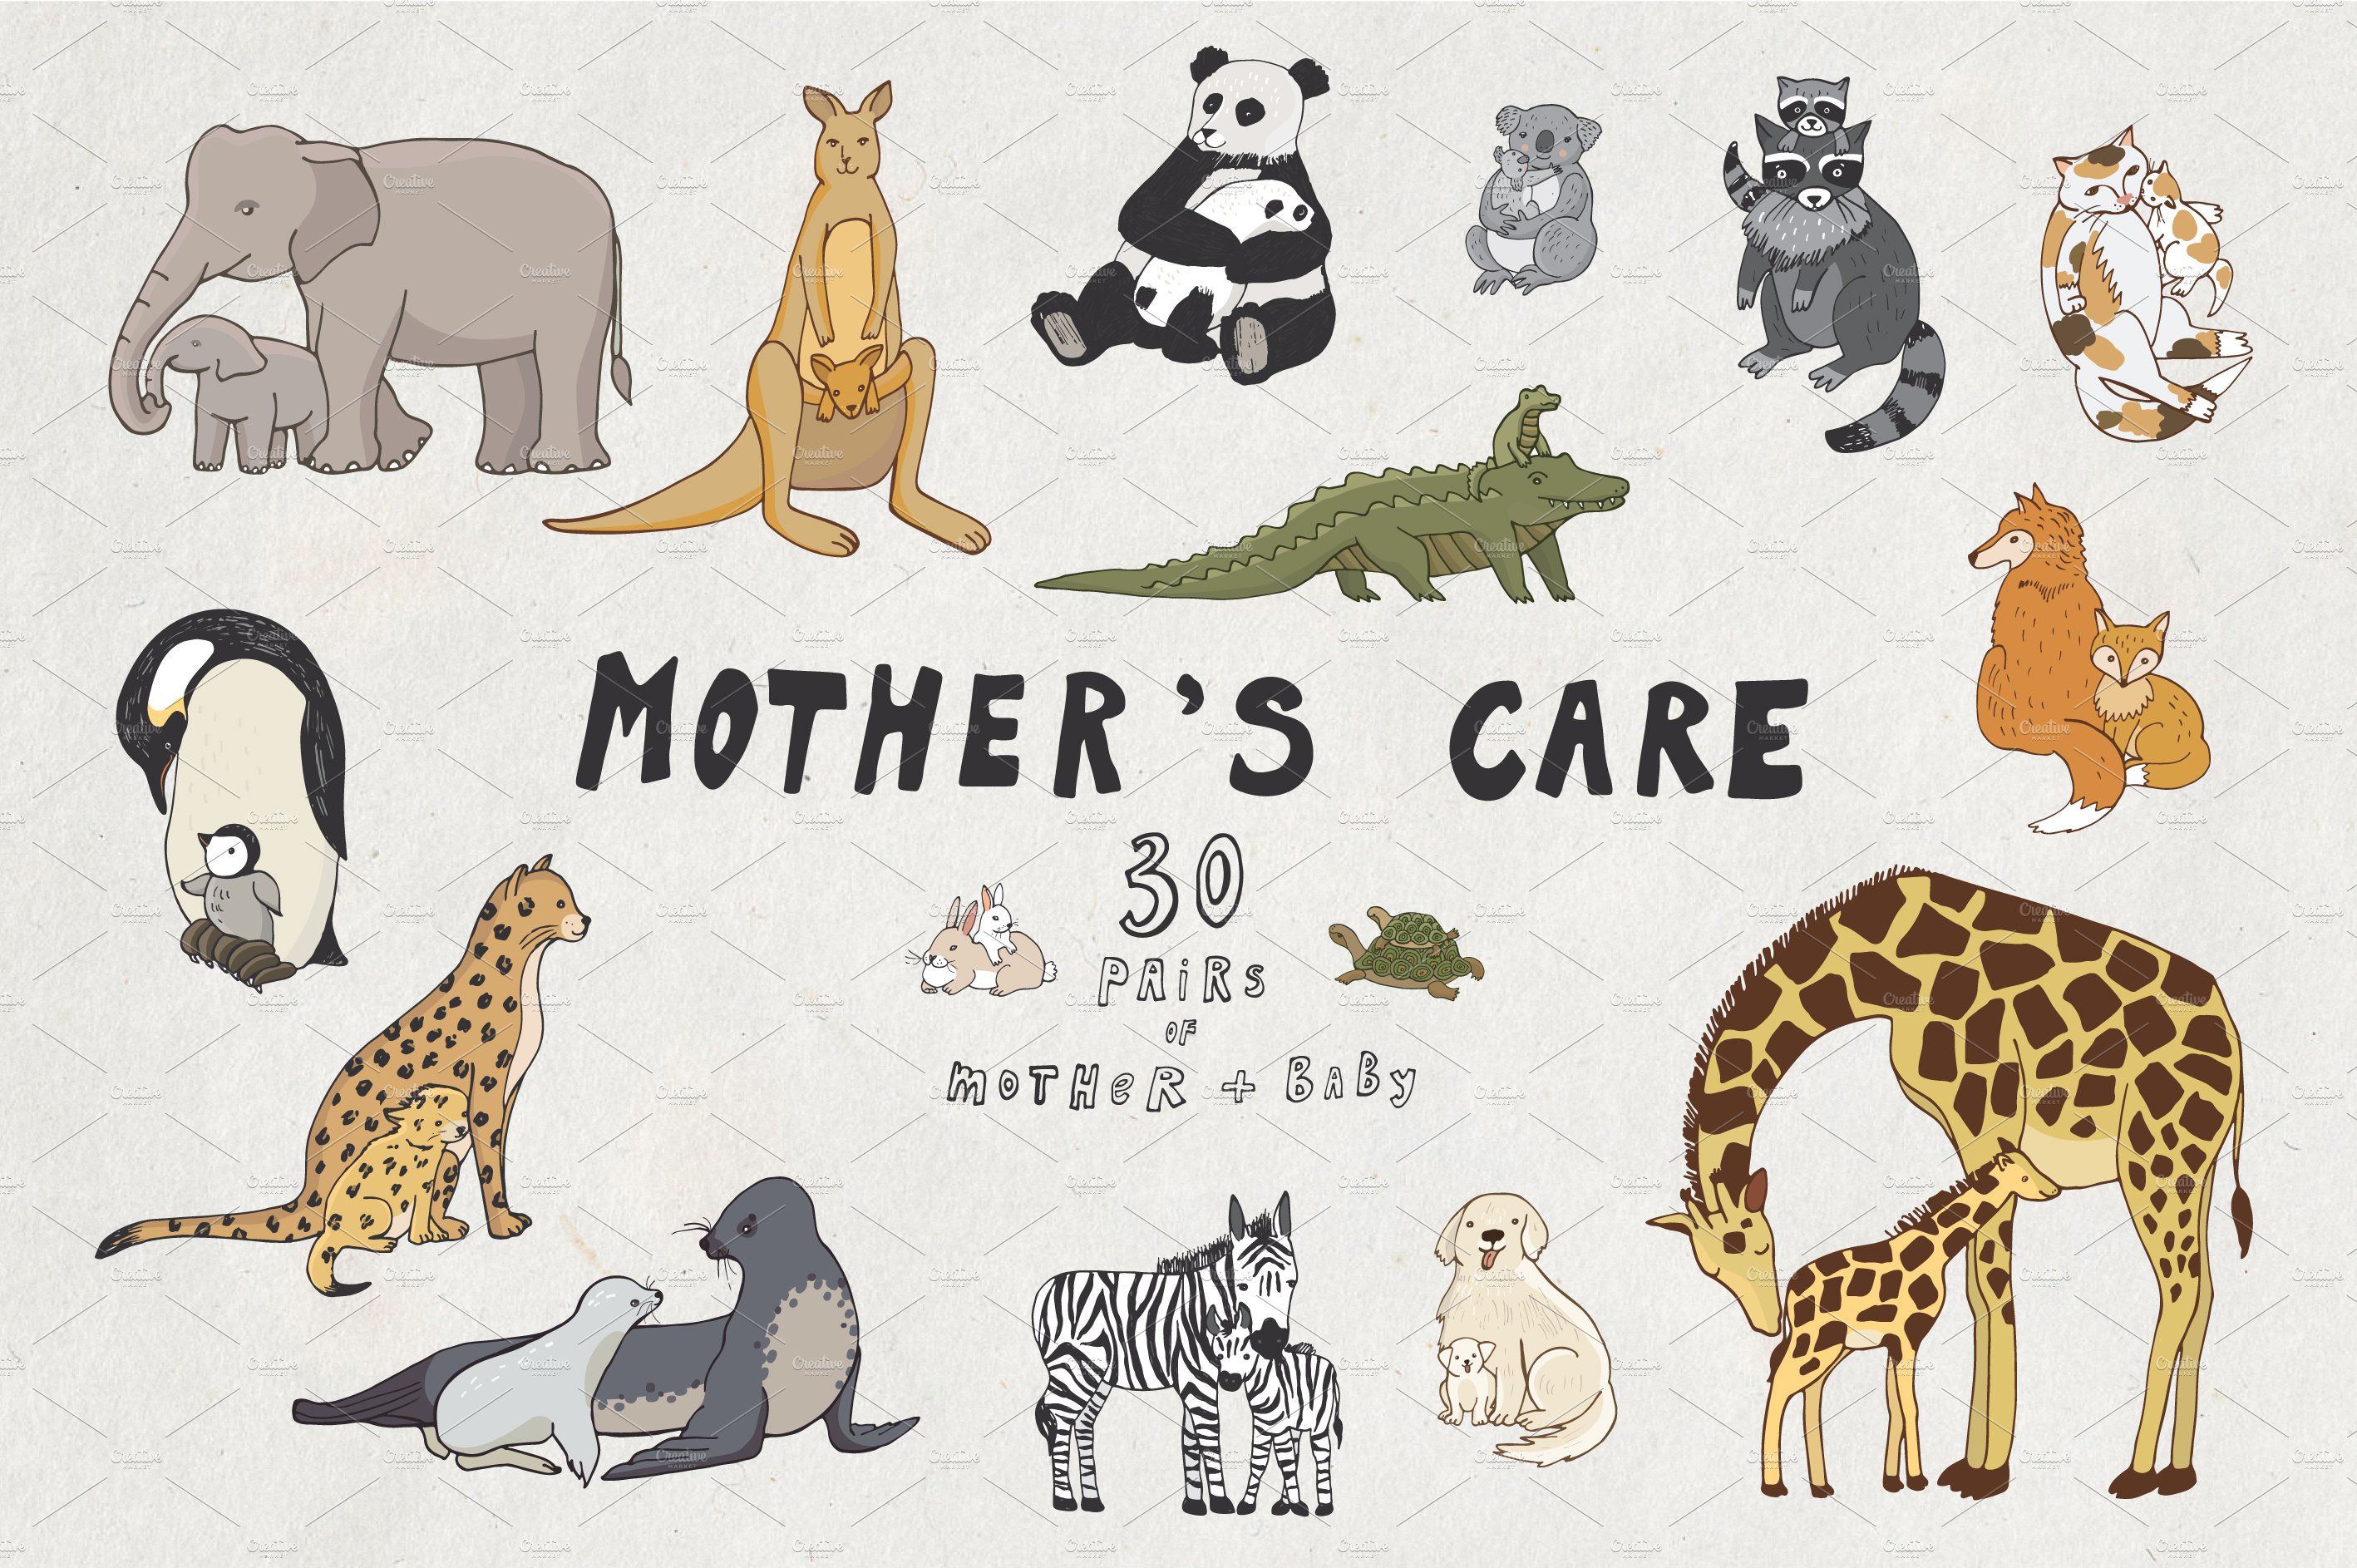 Mother's care cover image.